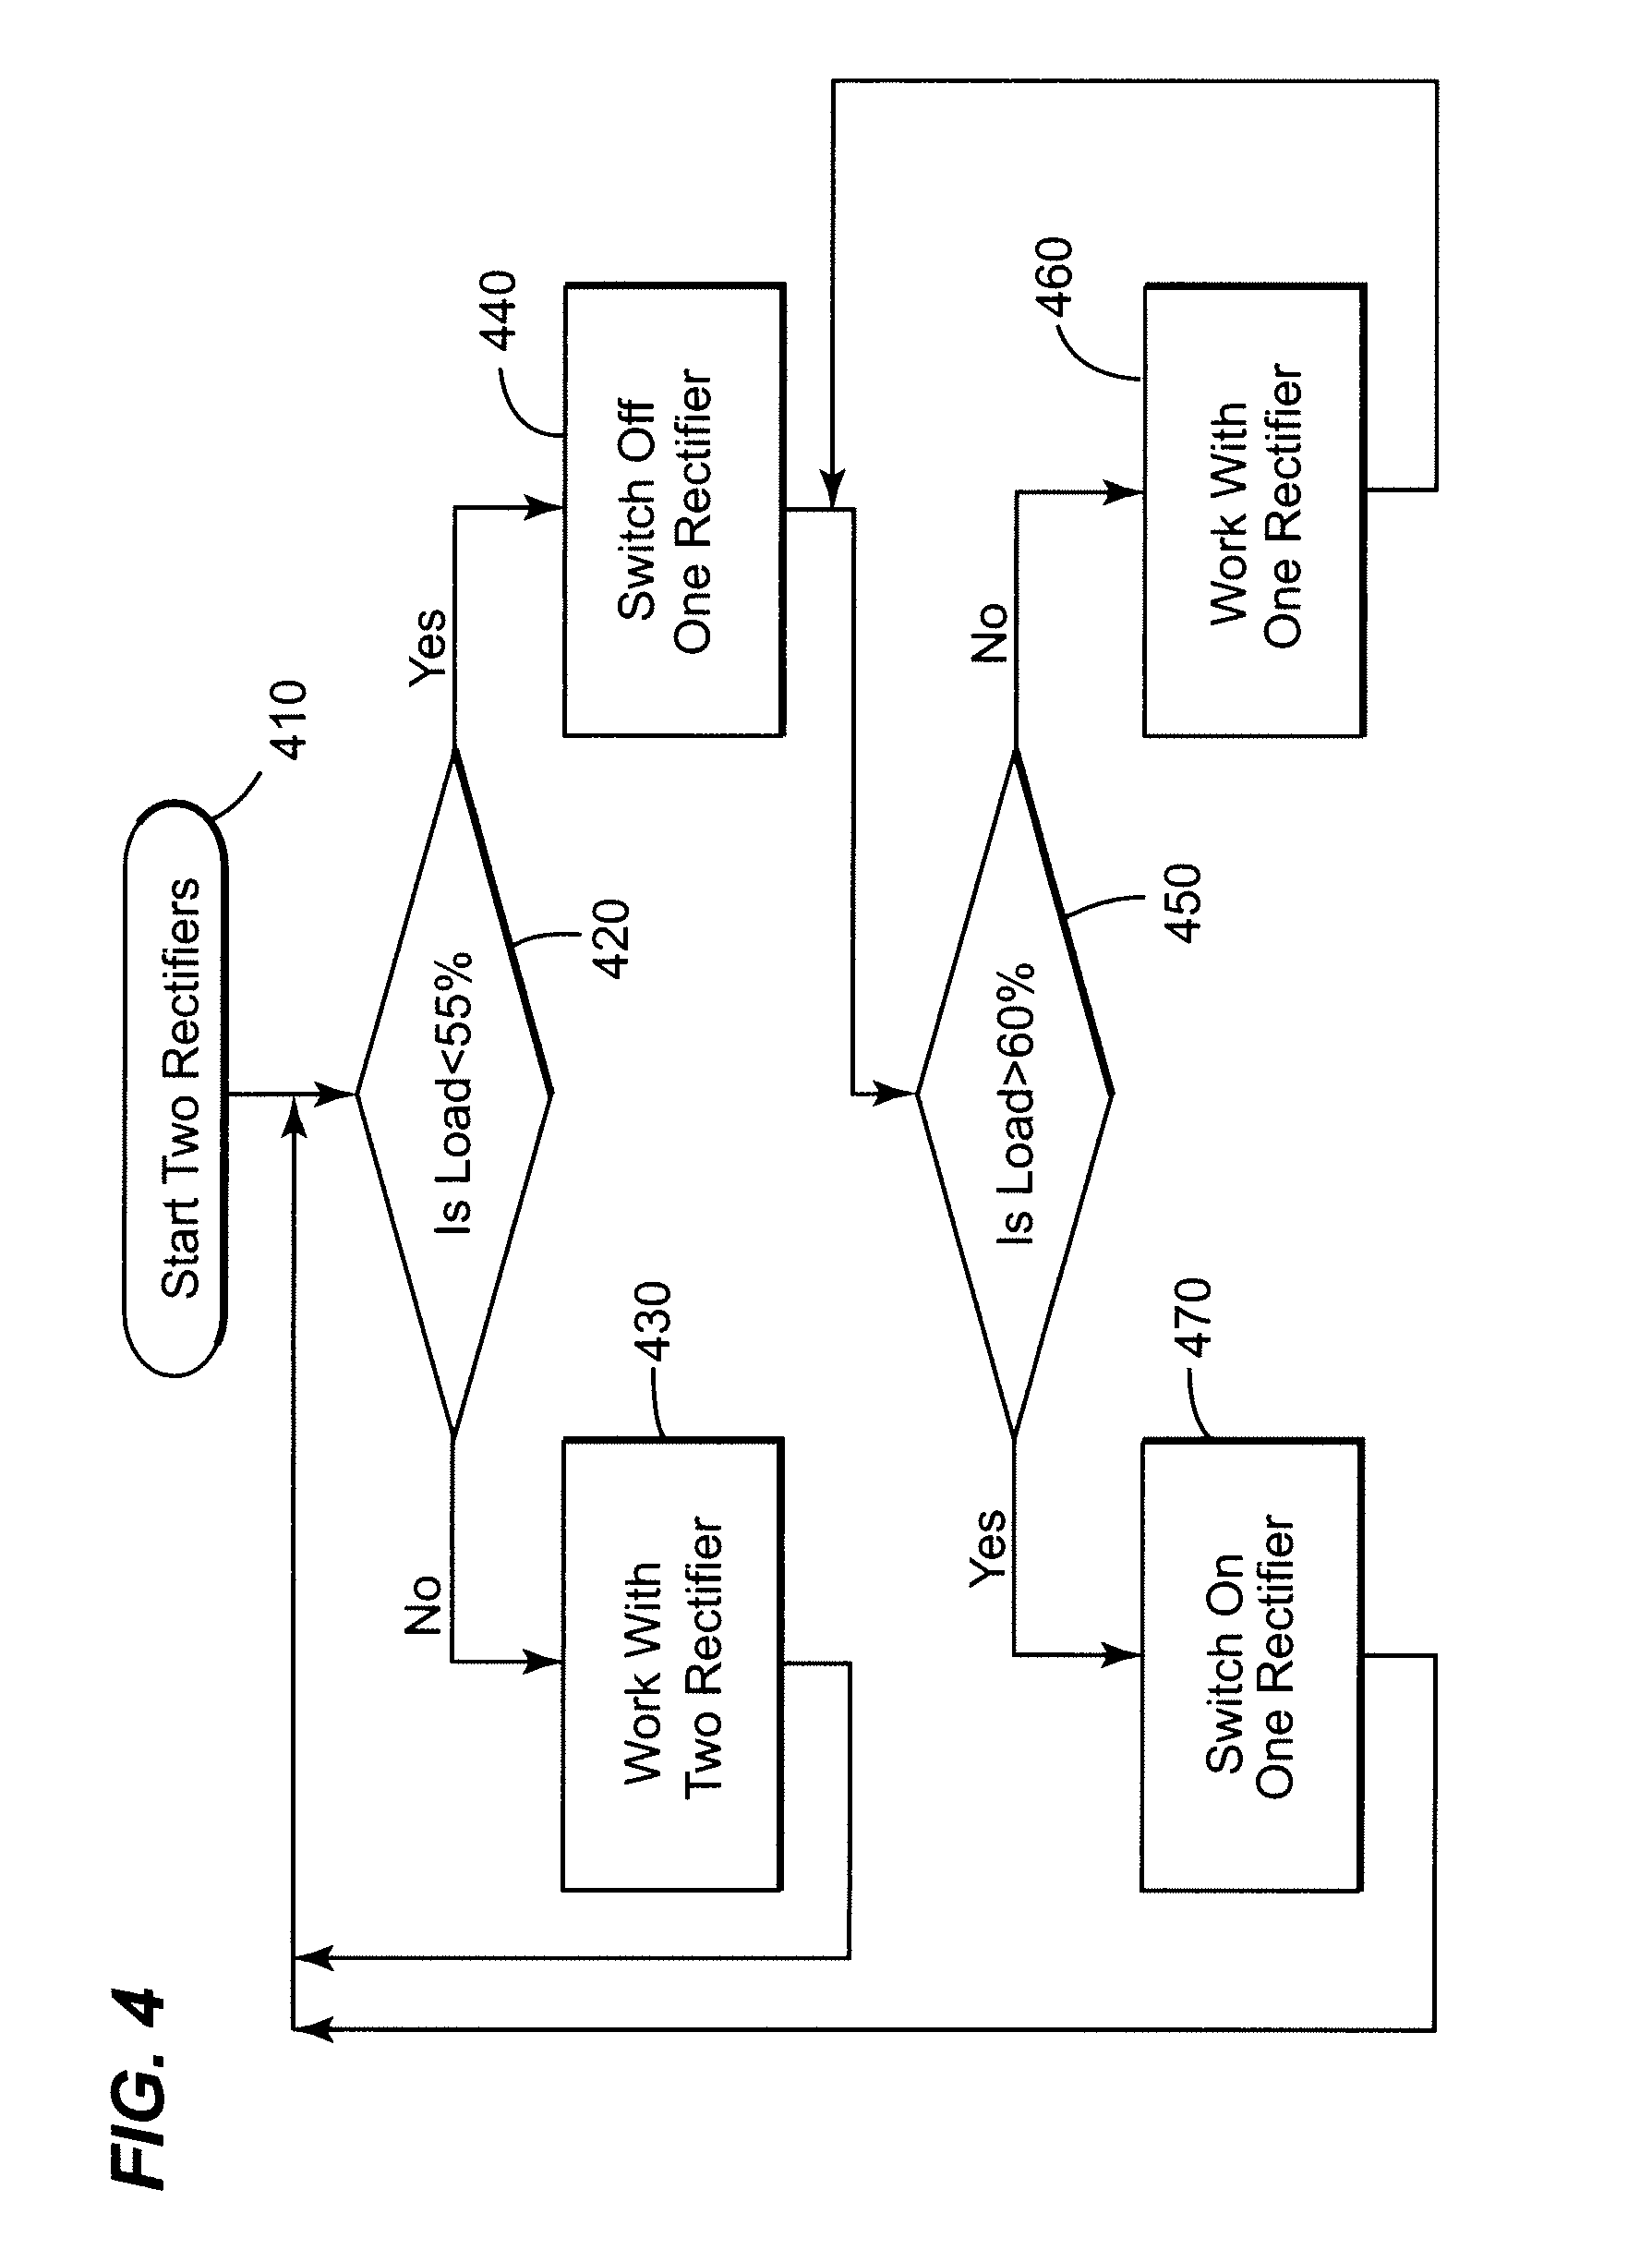 Method and system for managing uninterruptable power supply for harmonic reduction